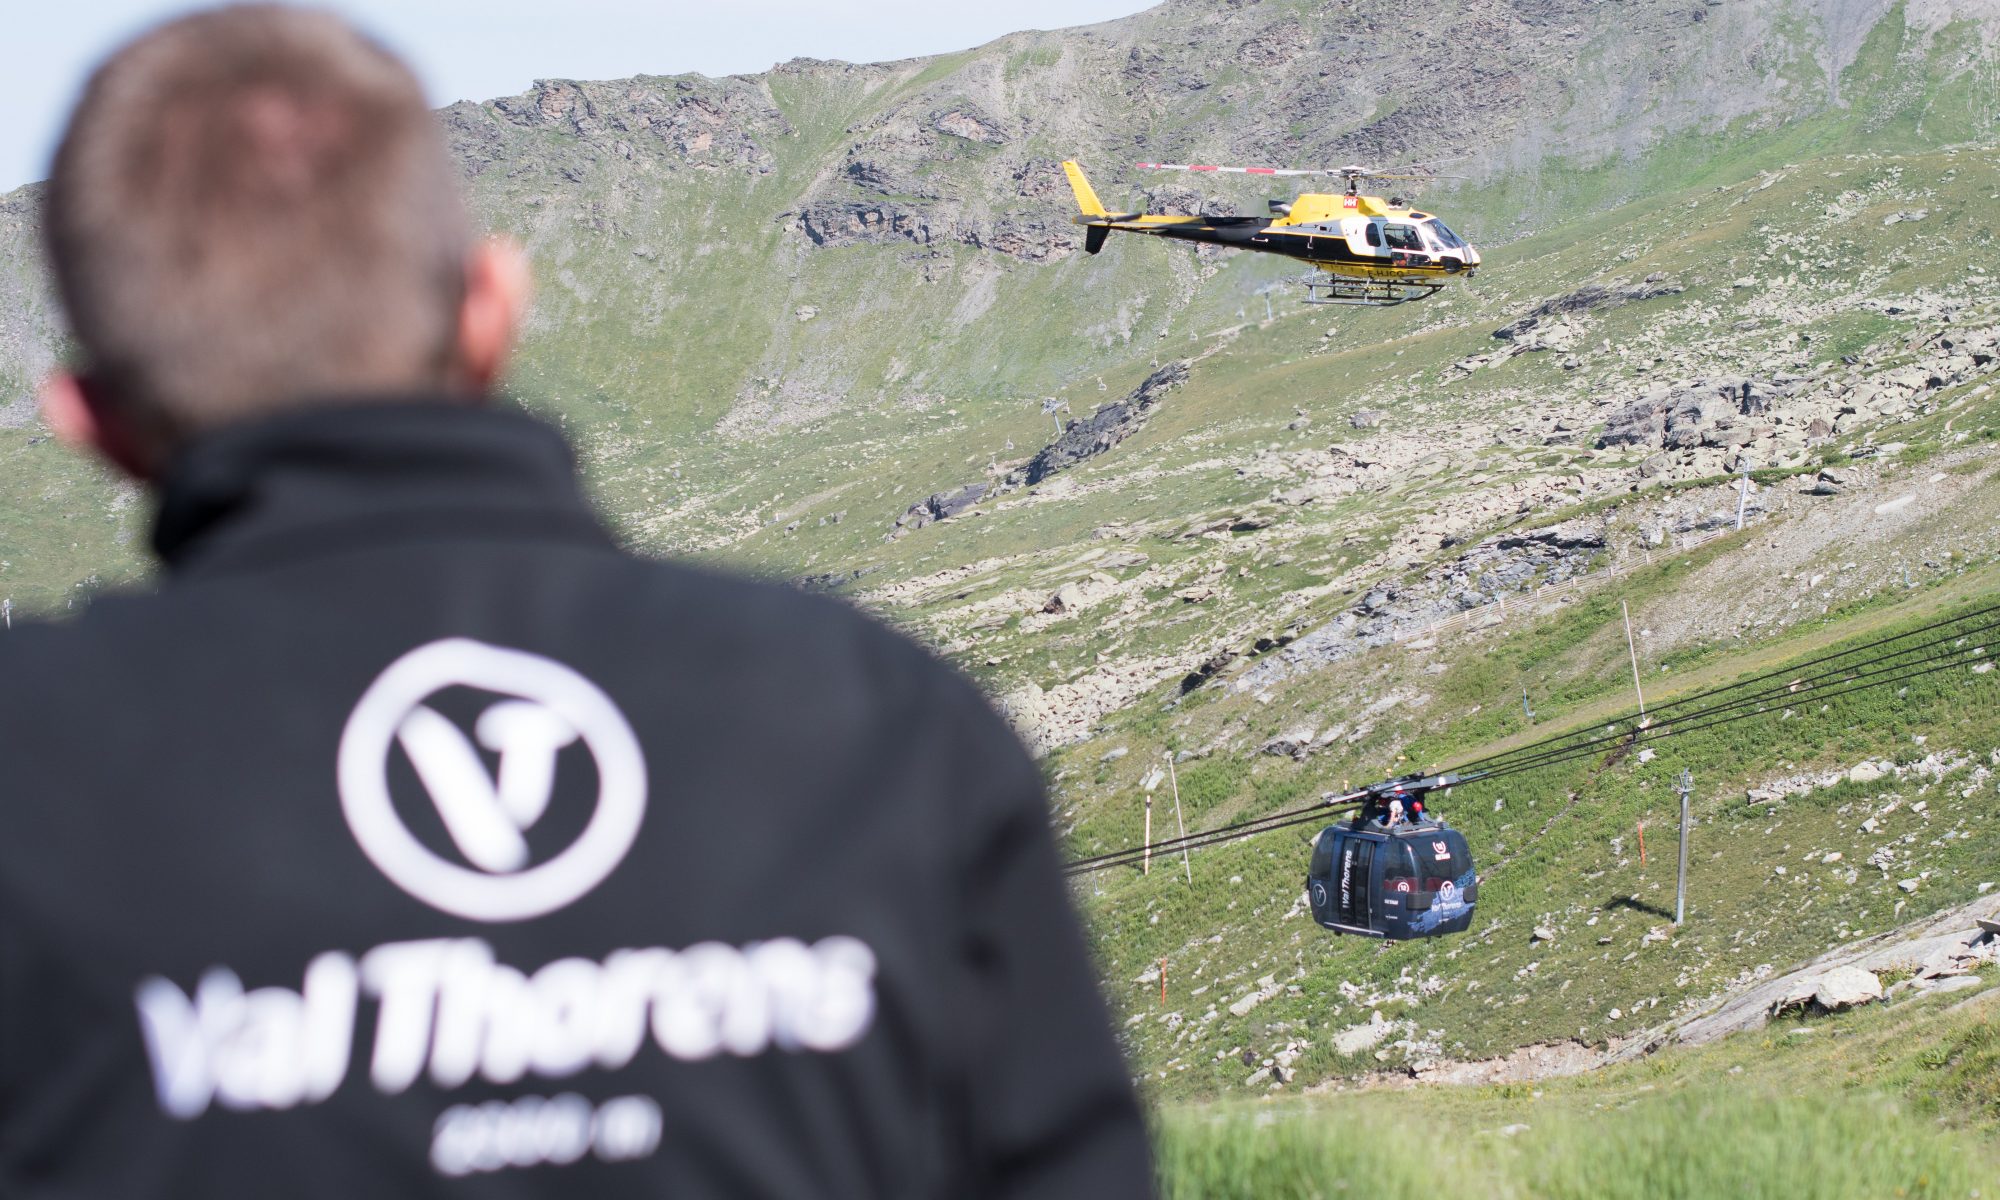 Works are undergoing at Val Thorens this summer for the next winter season 2019-20. What is new for Val Thorens for 2019/20.